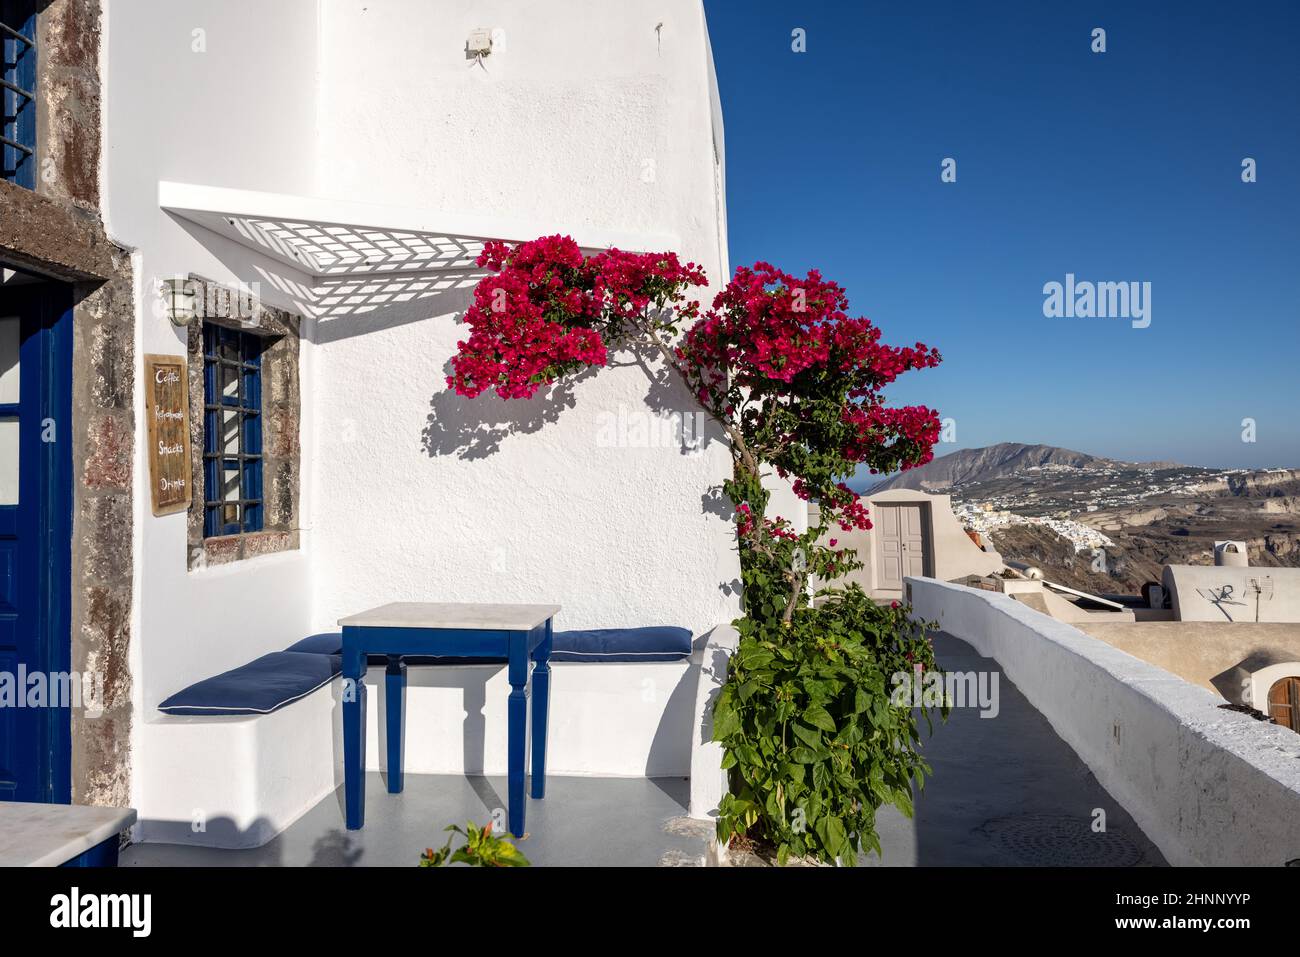 Red bougainvillea climbing on the wall of whitewashed house in Imerovigli on Santorini island, Cyclades, Greece Stock Photo